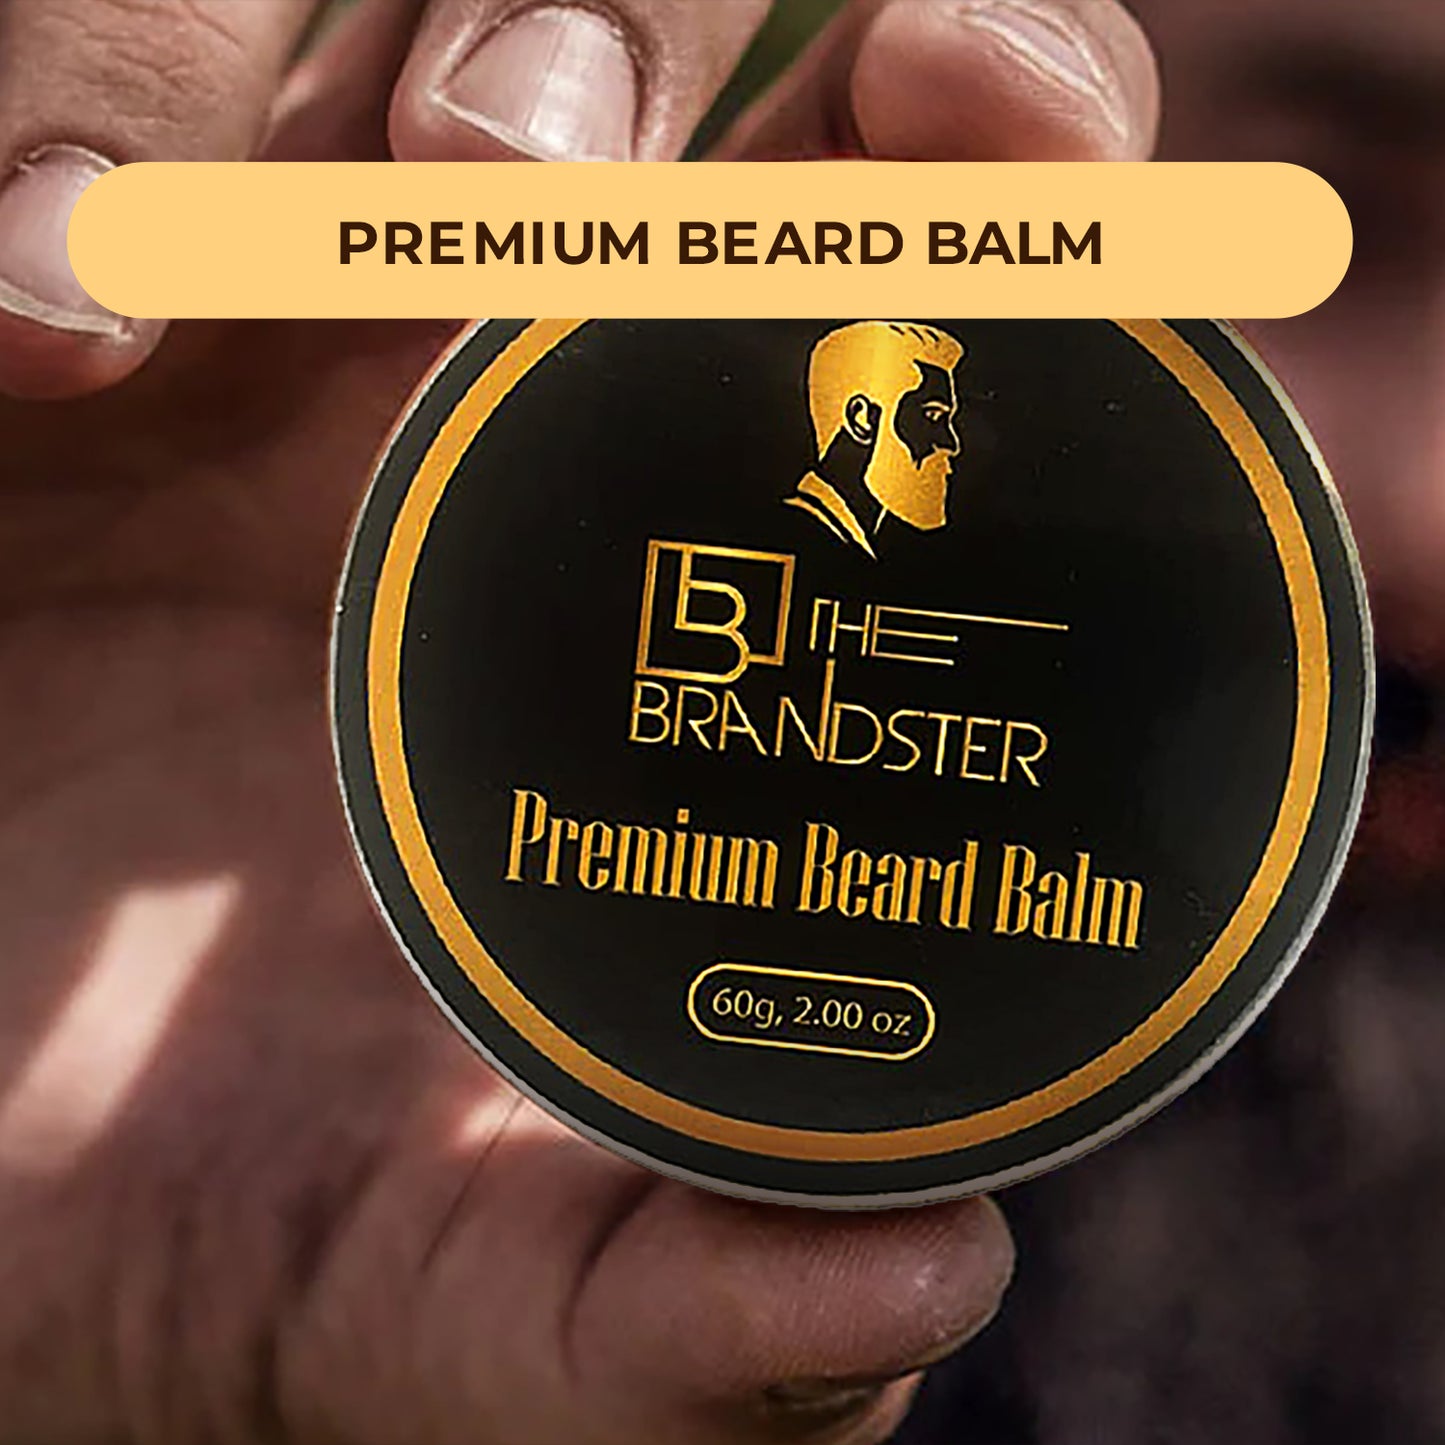 4 in 1 Beard Grooming, Styling and Trimming Kit for Men, Beard Balm, Beard Brush & Comb and Scissor